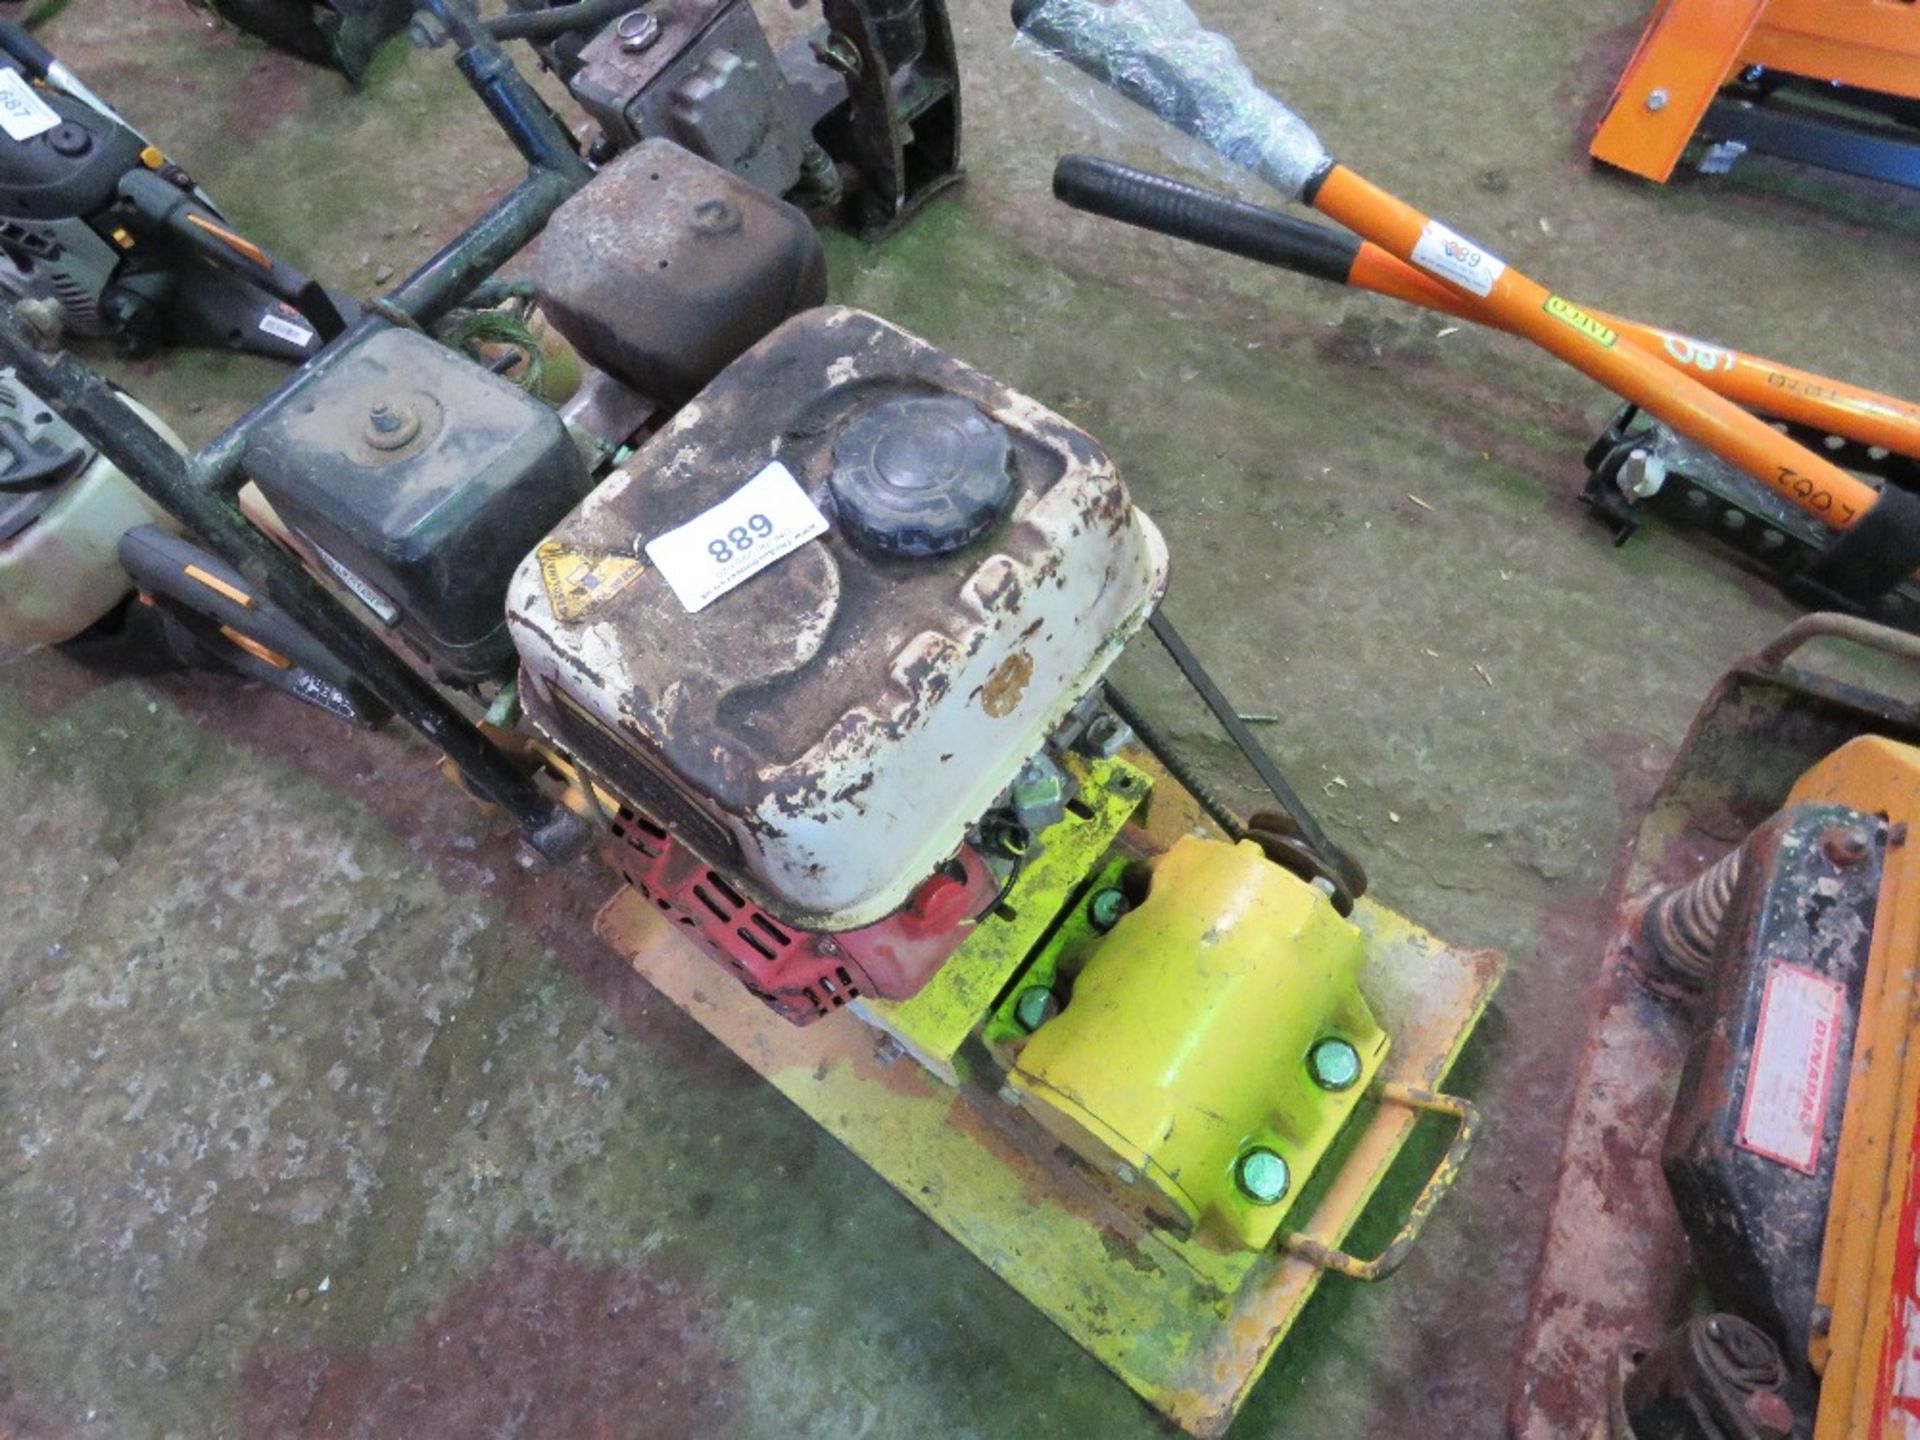 PETROL ENGINED COMPACTION PLATE. - Image 2 of 2